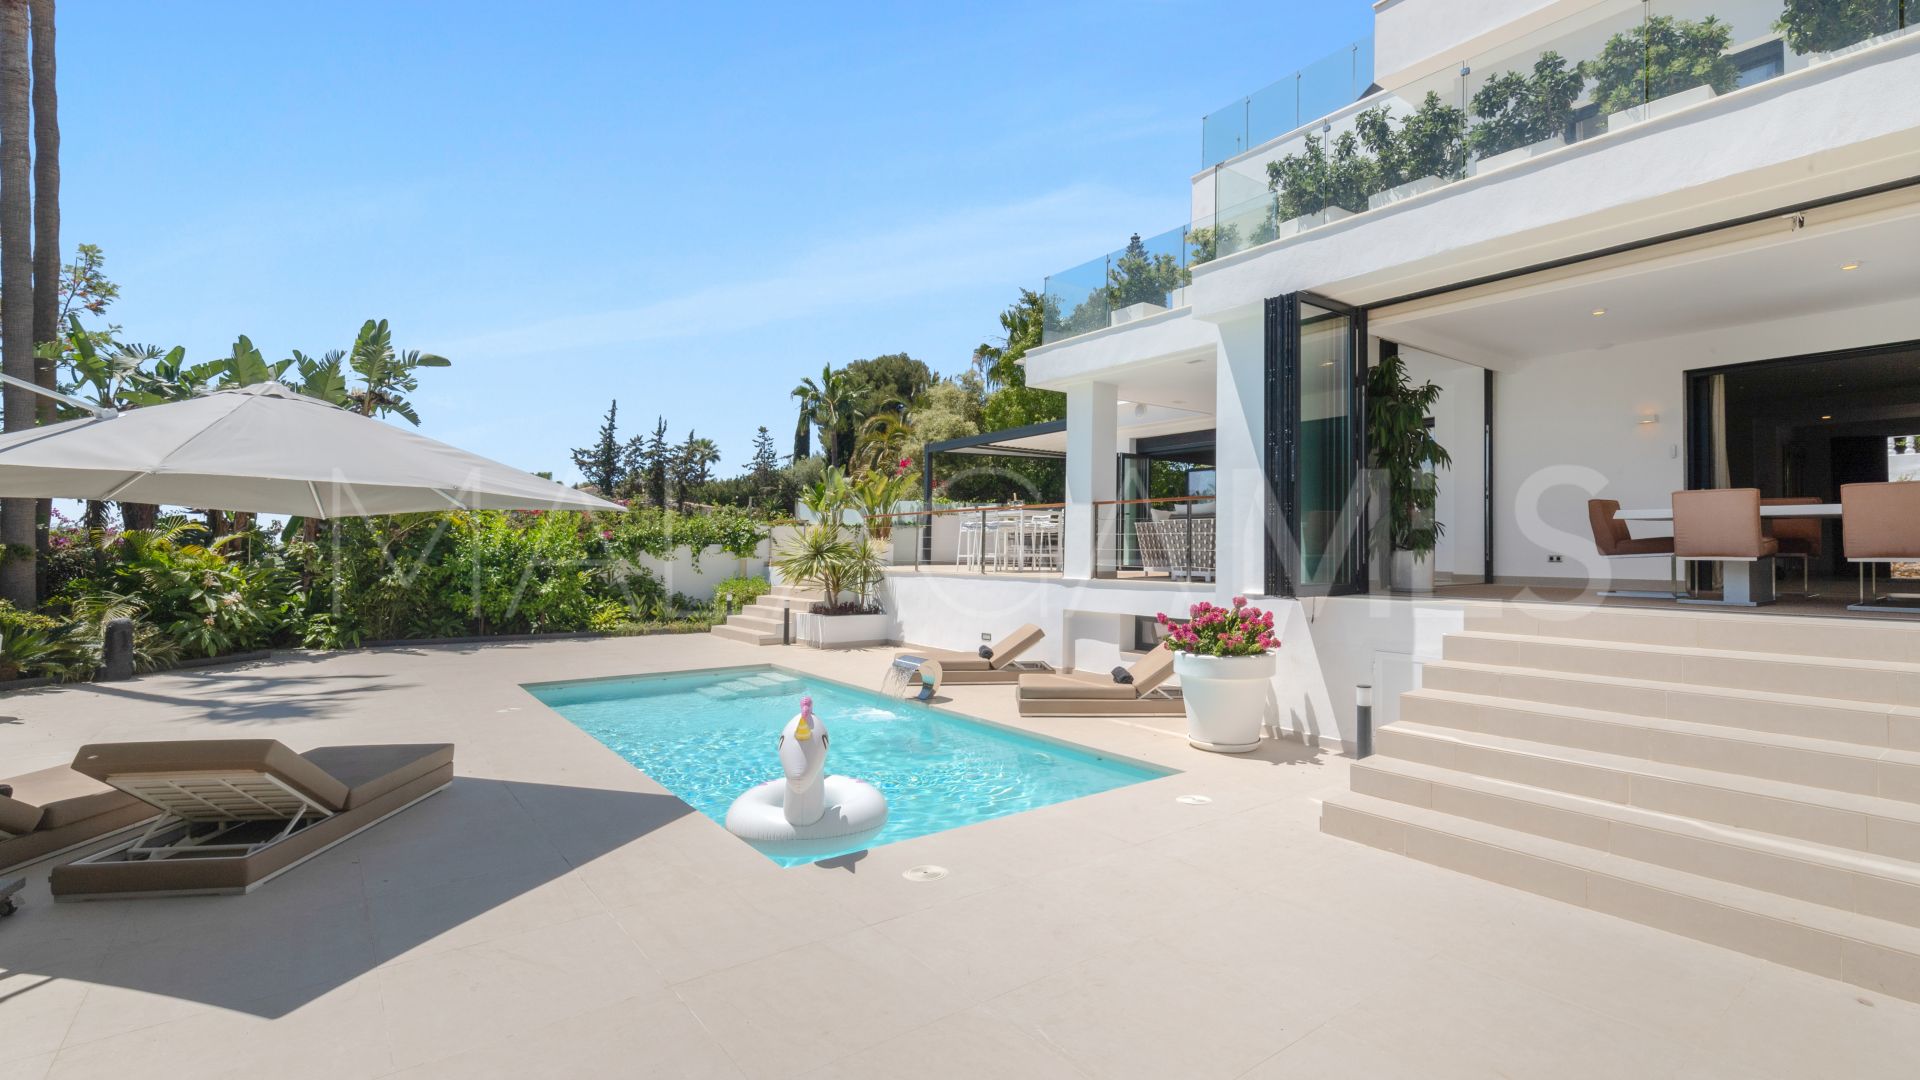 For sale villa in Marbella with 4 bedrooms